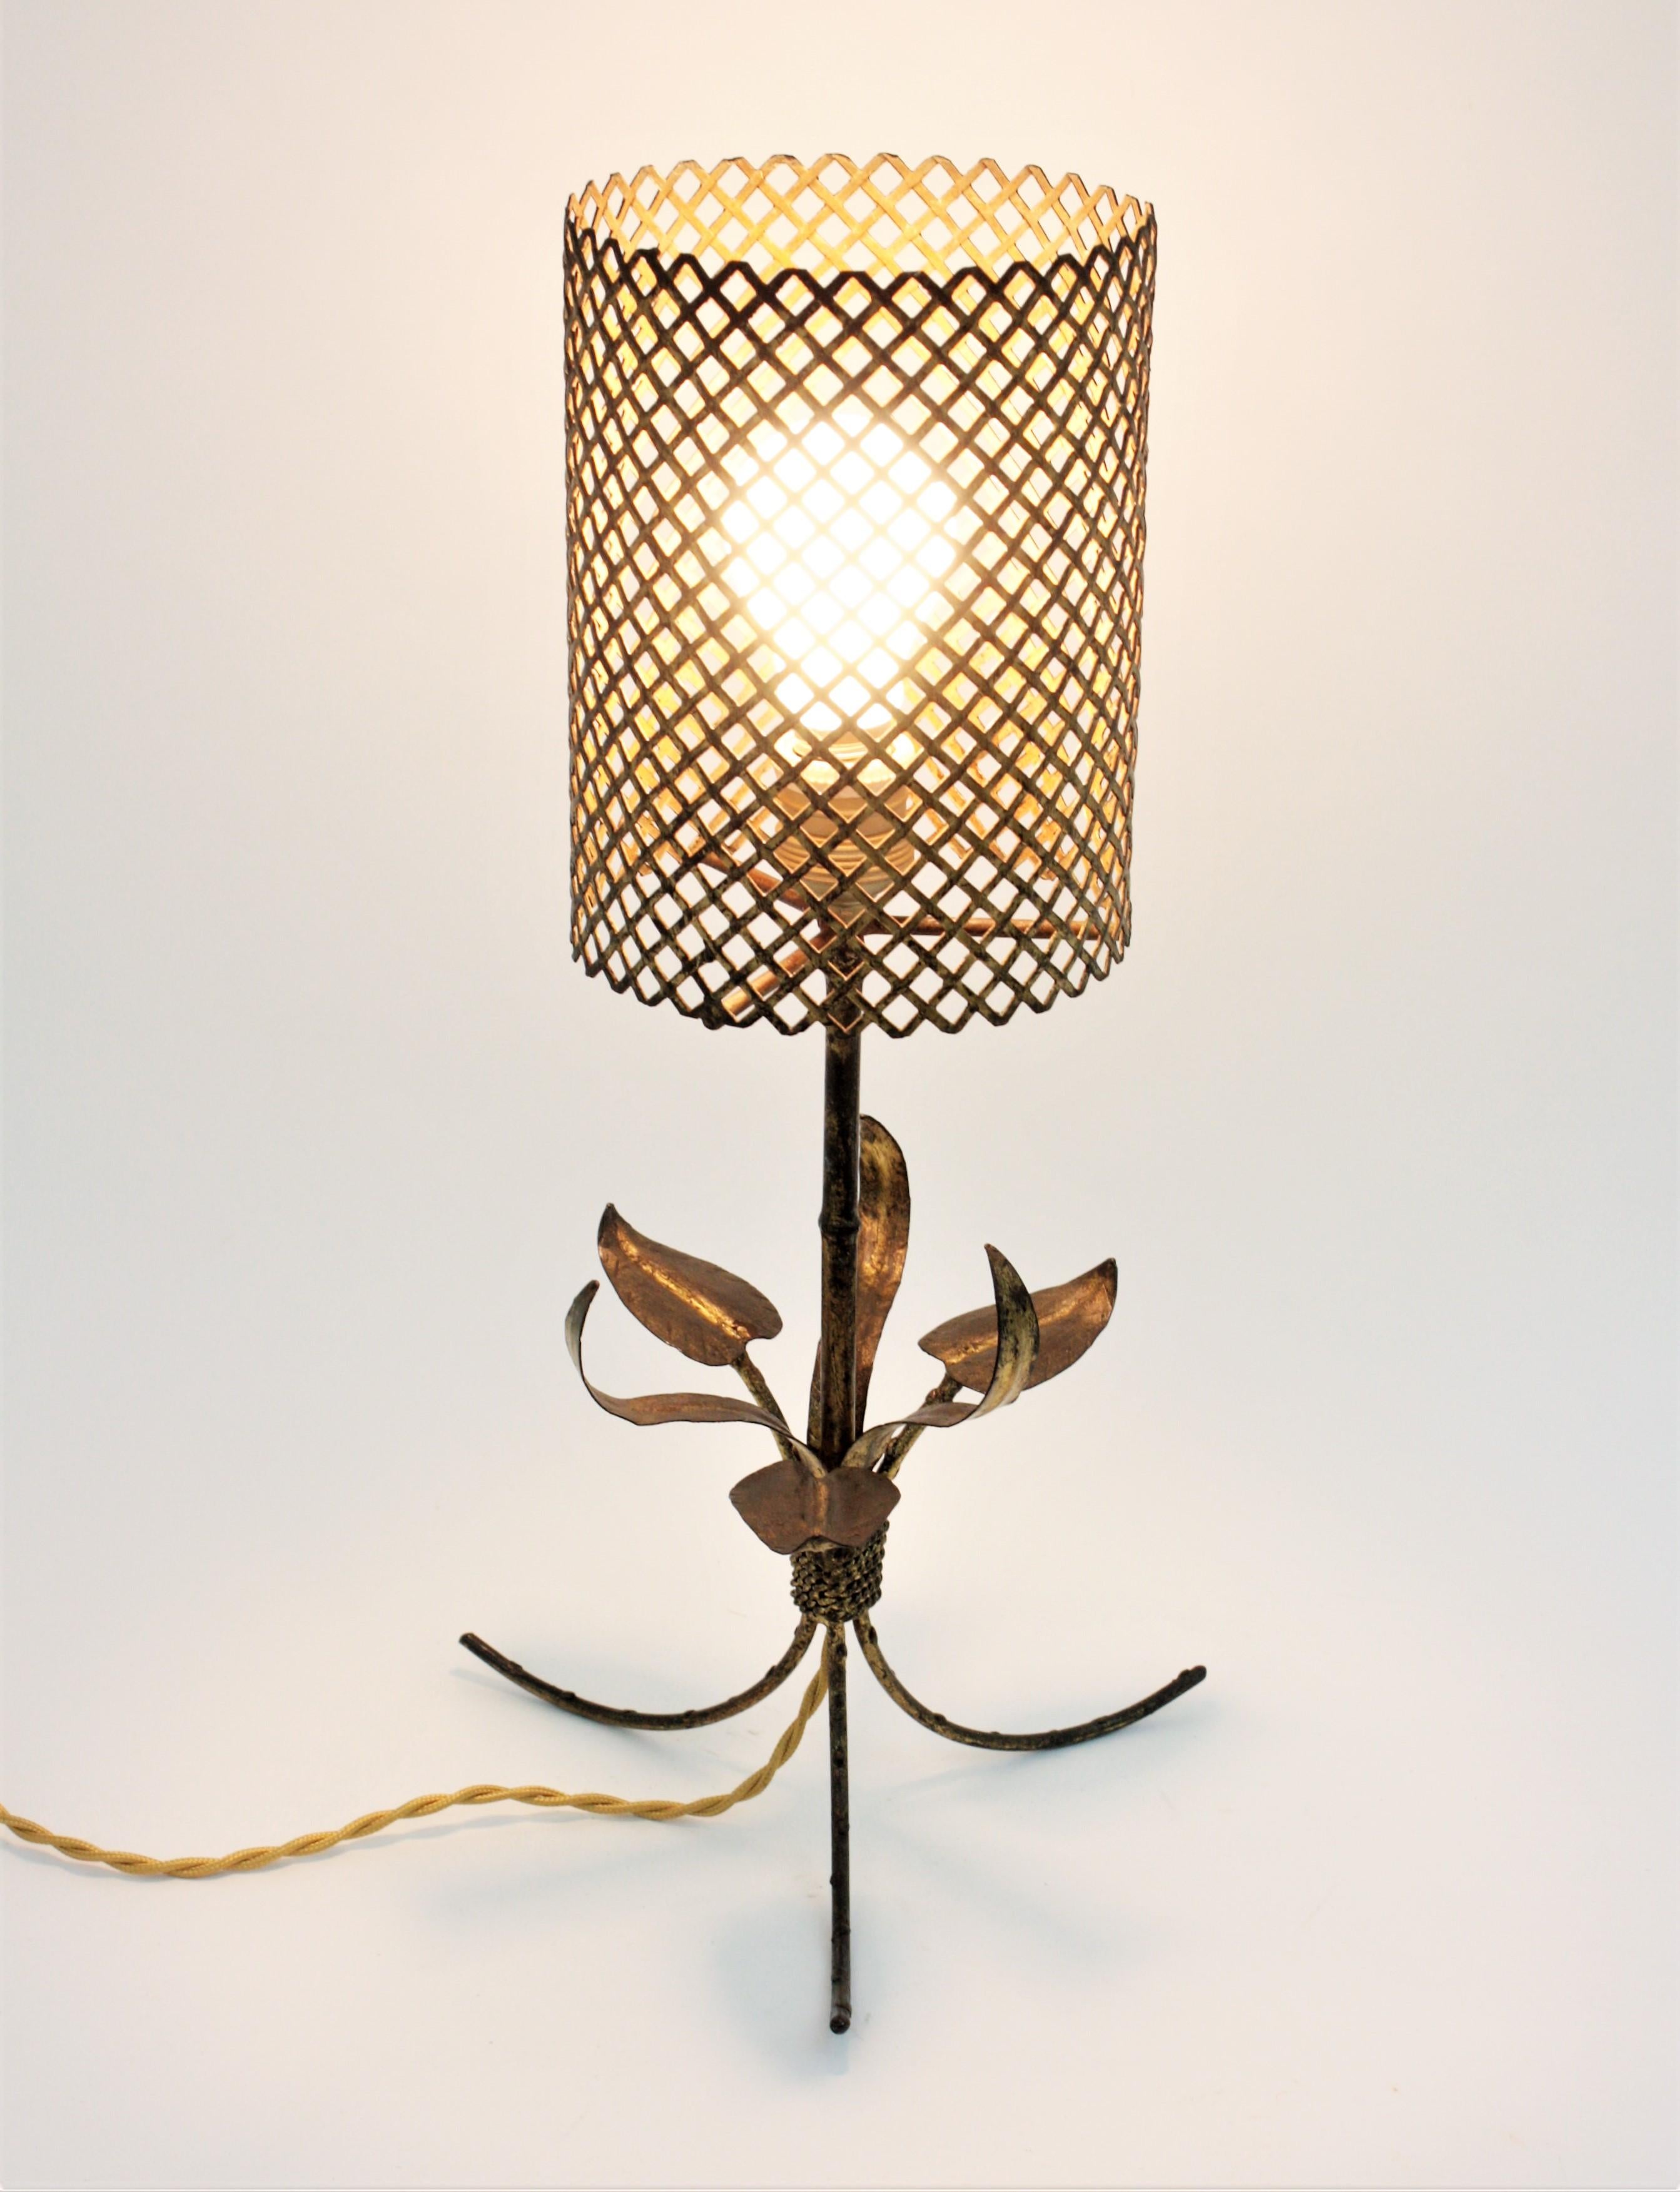 Hollywood Regency French Faux Bamboo Foliage Tripod Table Lamp in Gilt Metal, 1940s For Sale